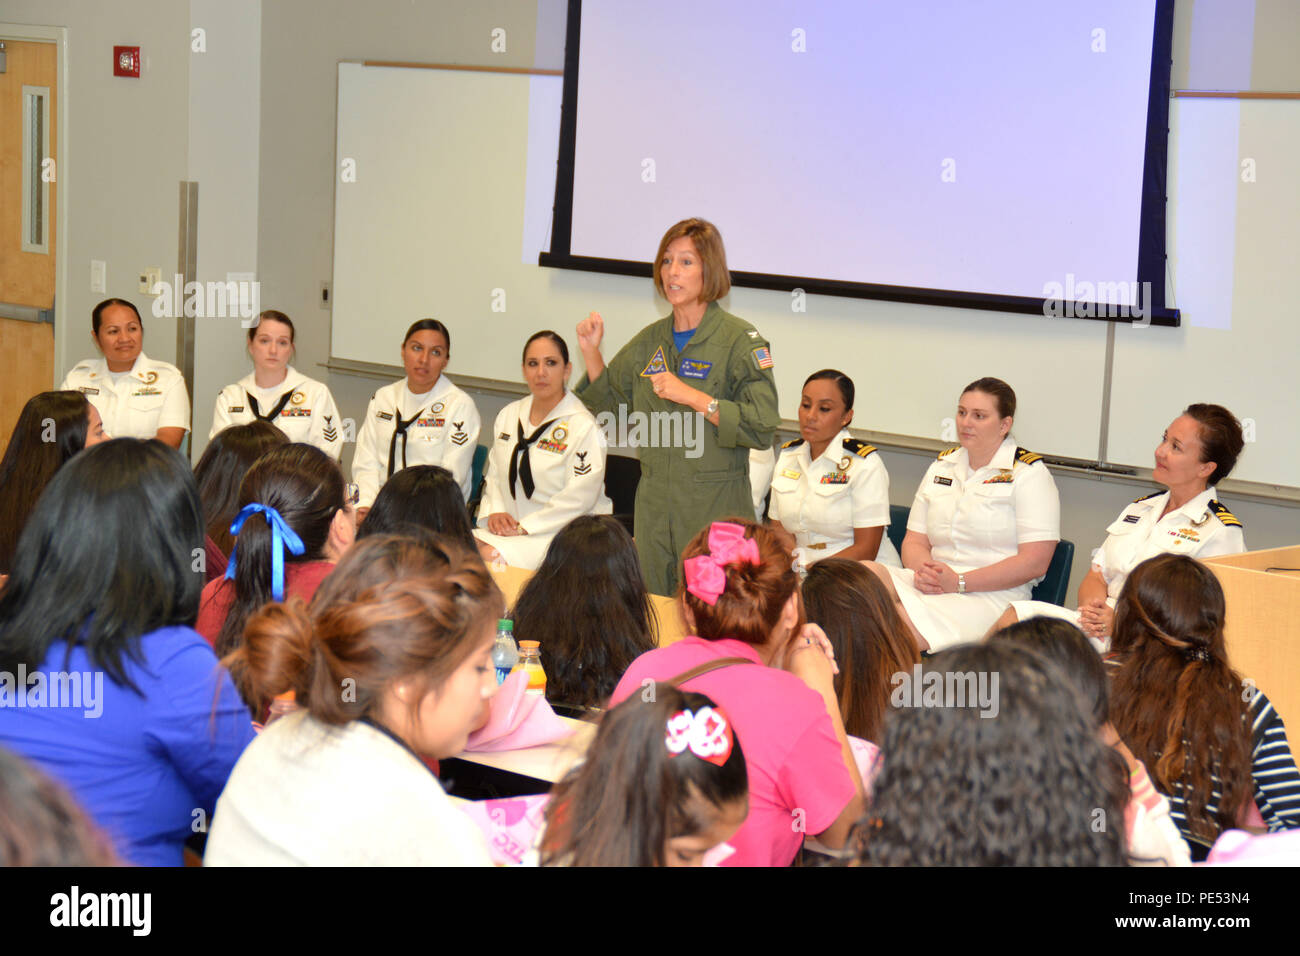 Edinburg Texas Oct 7 15 Huntsville Ala Native And Naval Aviator Capt Tamara Graham Director Diversity And Inclusion Navy Air Forces Speaks To Young Latinas And Their Mothers About Life In The